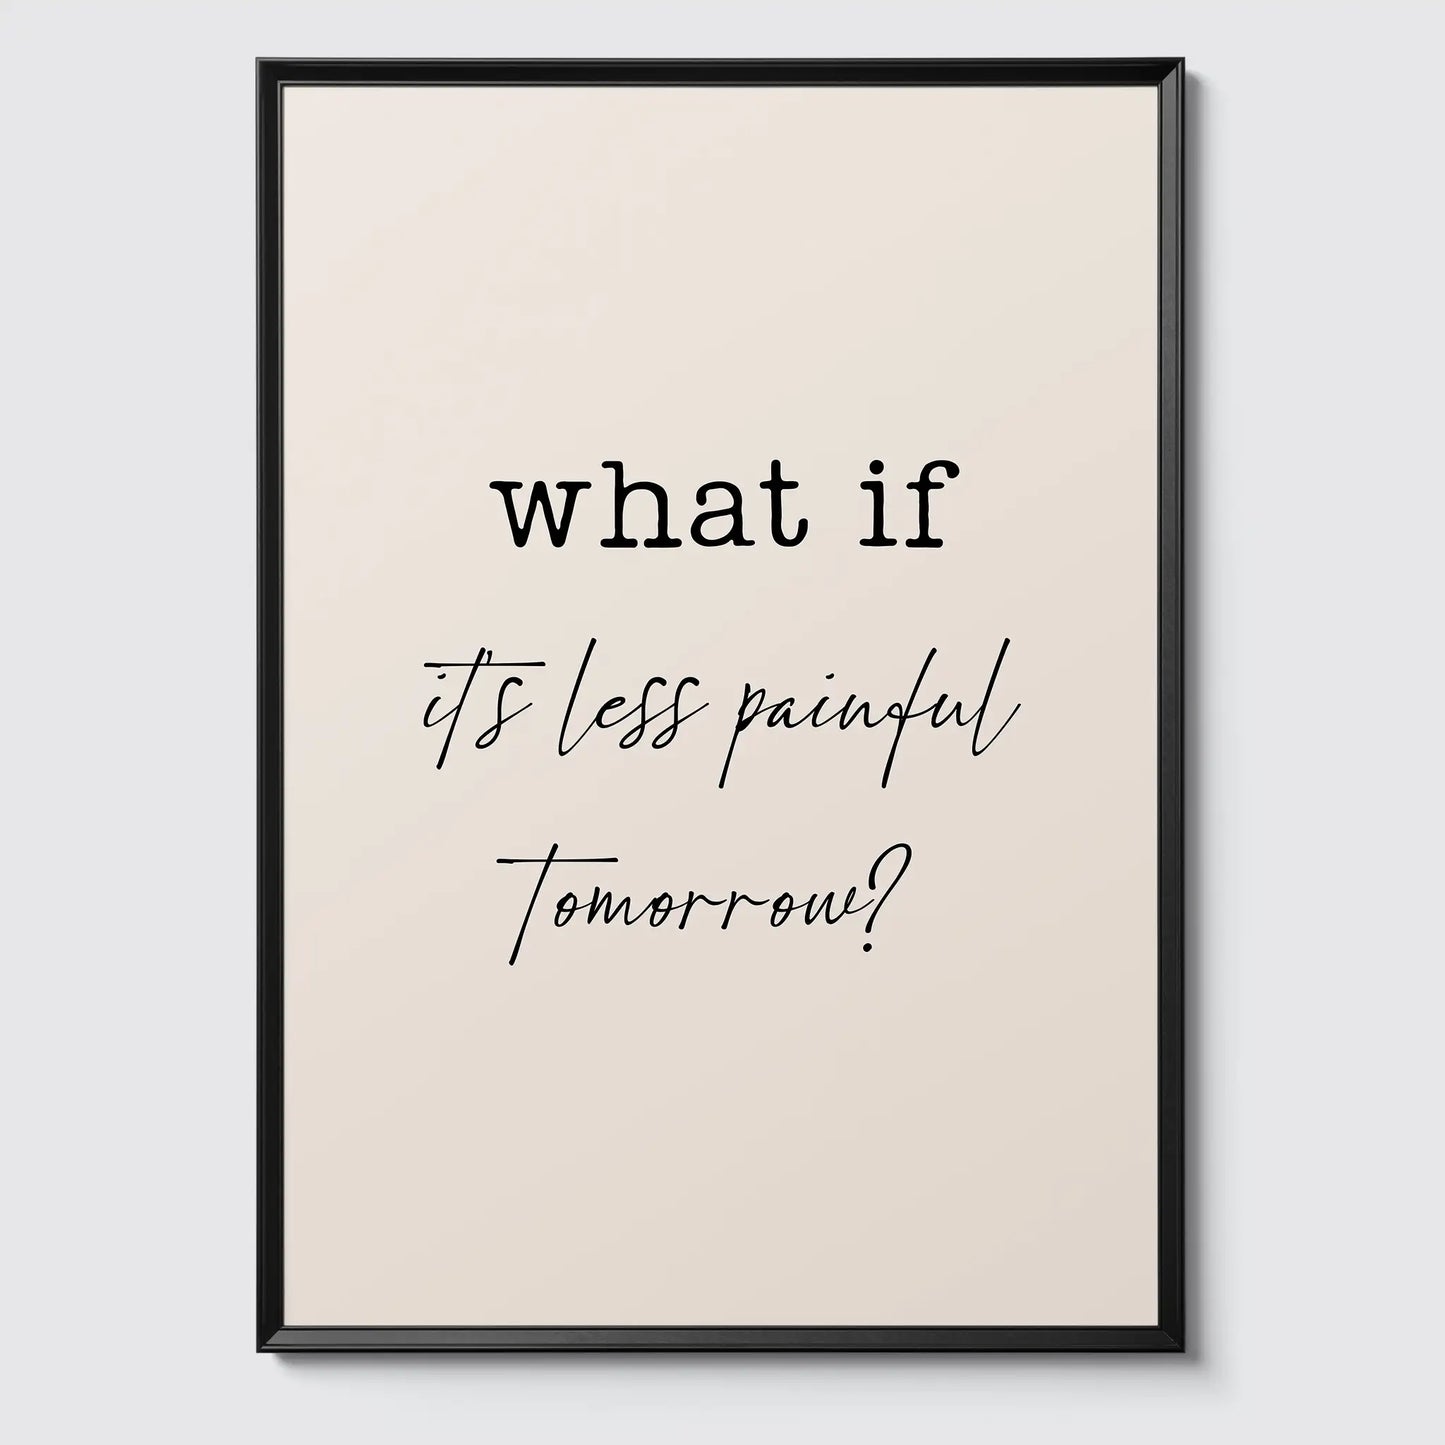 WHAT IF it's less painful tomorrow? - Poster